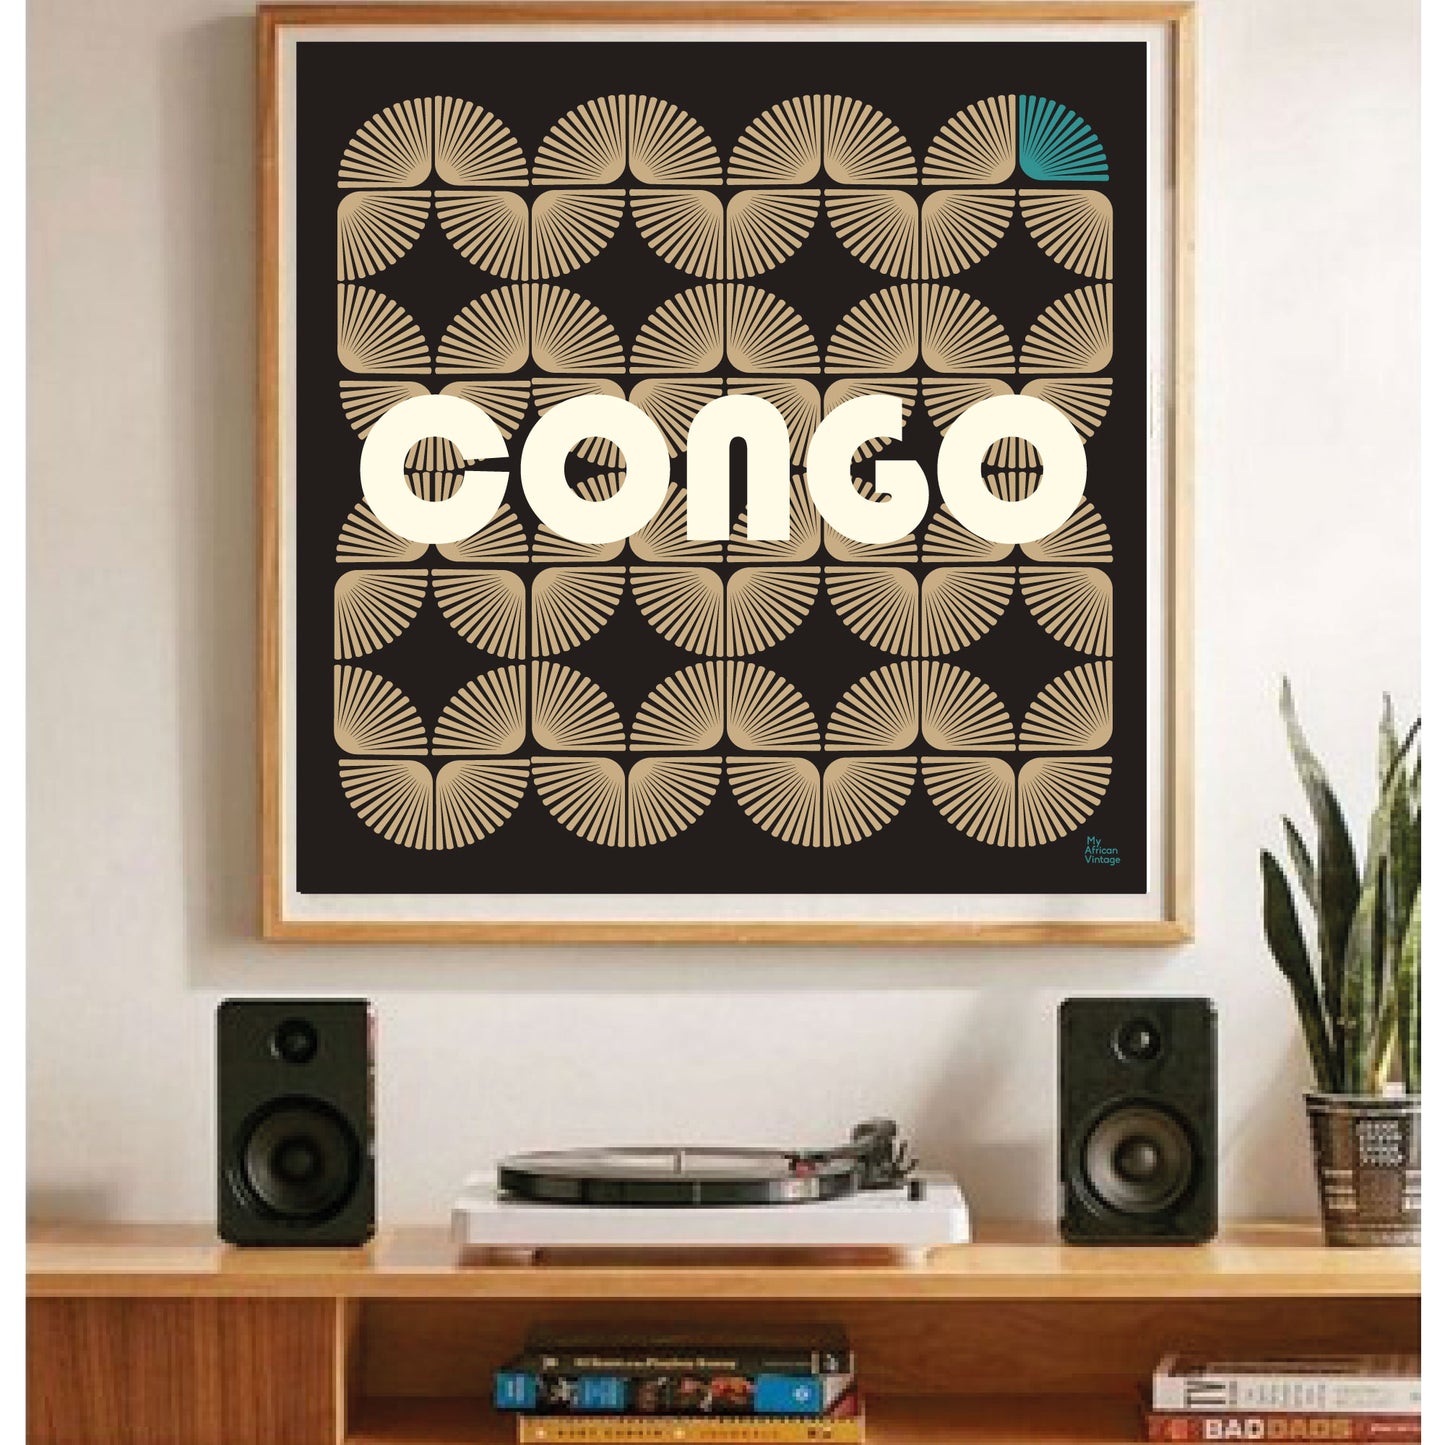 Affiche style rétro "Congo" - collection "My African Vintage"